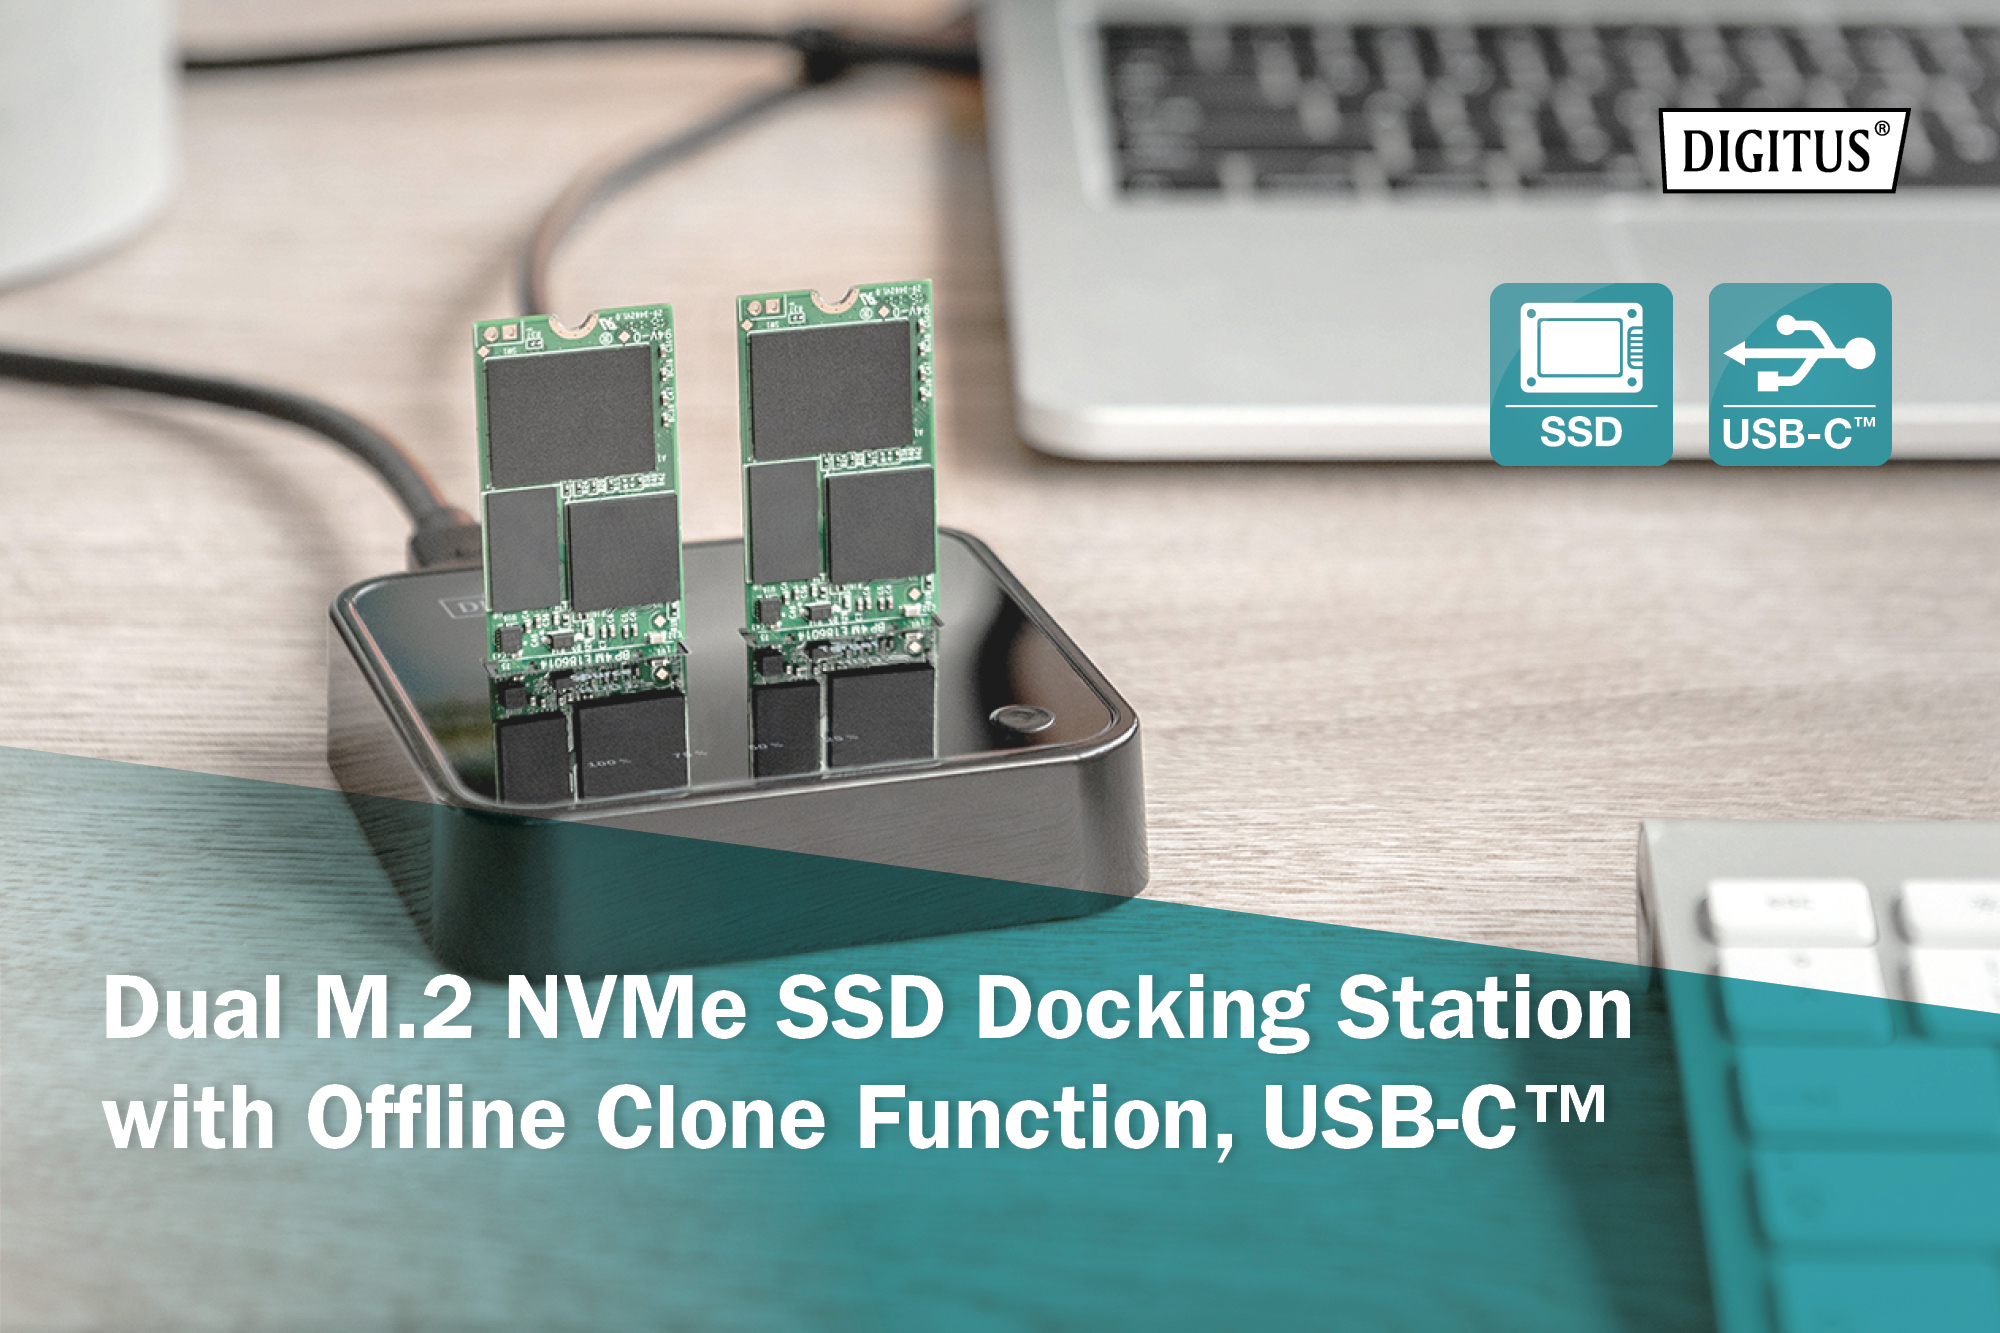 Digitus By Assmann Shop Dual M2 Nvme Ssd Docking Station With Offline Clone Function Usb C™ 4921